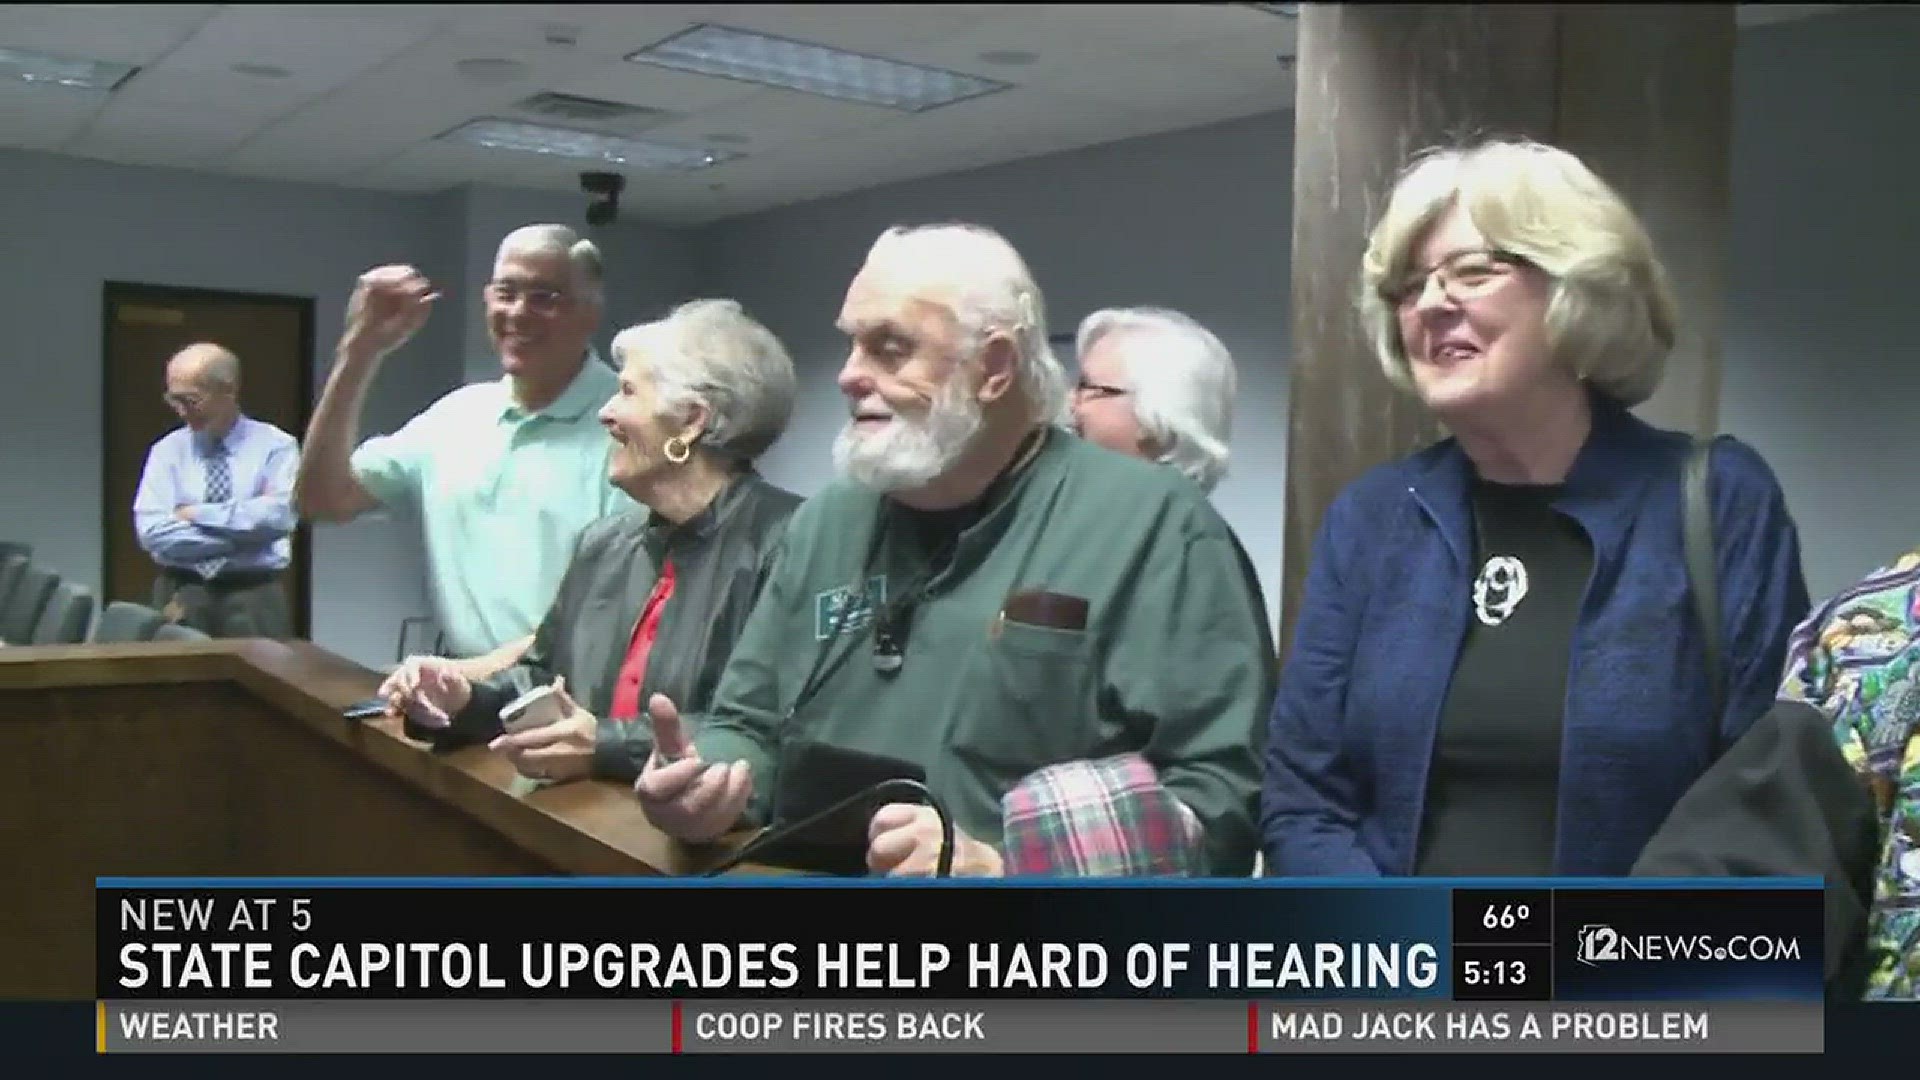 Improvements being made for people with hearing loss who want to take part in legislature.